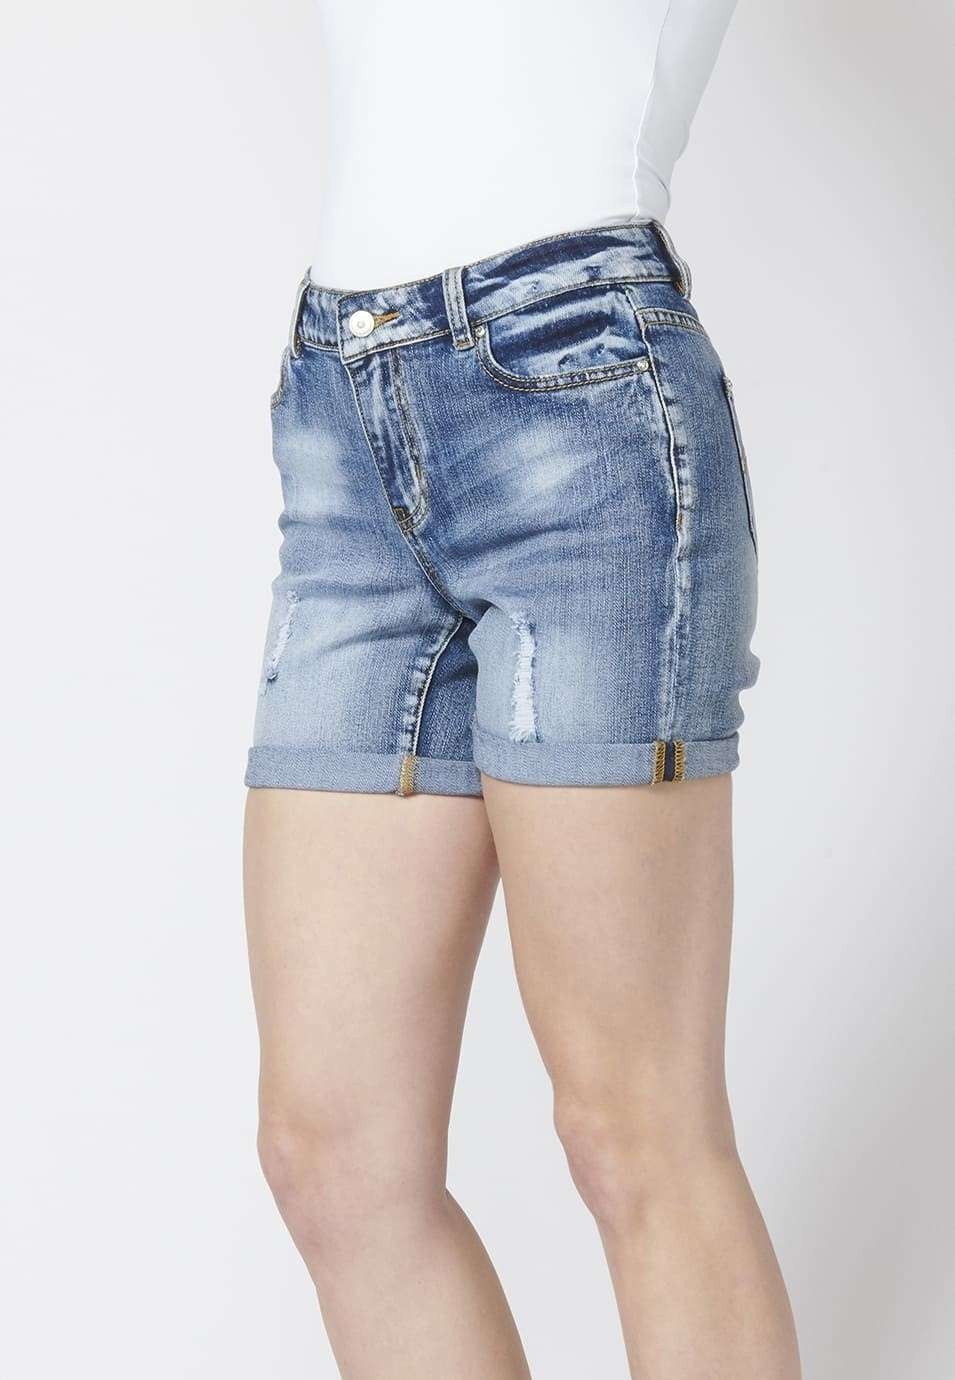 Women's denim shorts elastic jean shorts above the knee with ripped details